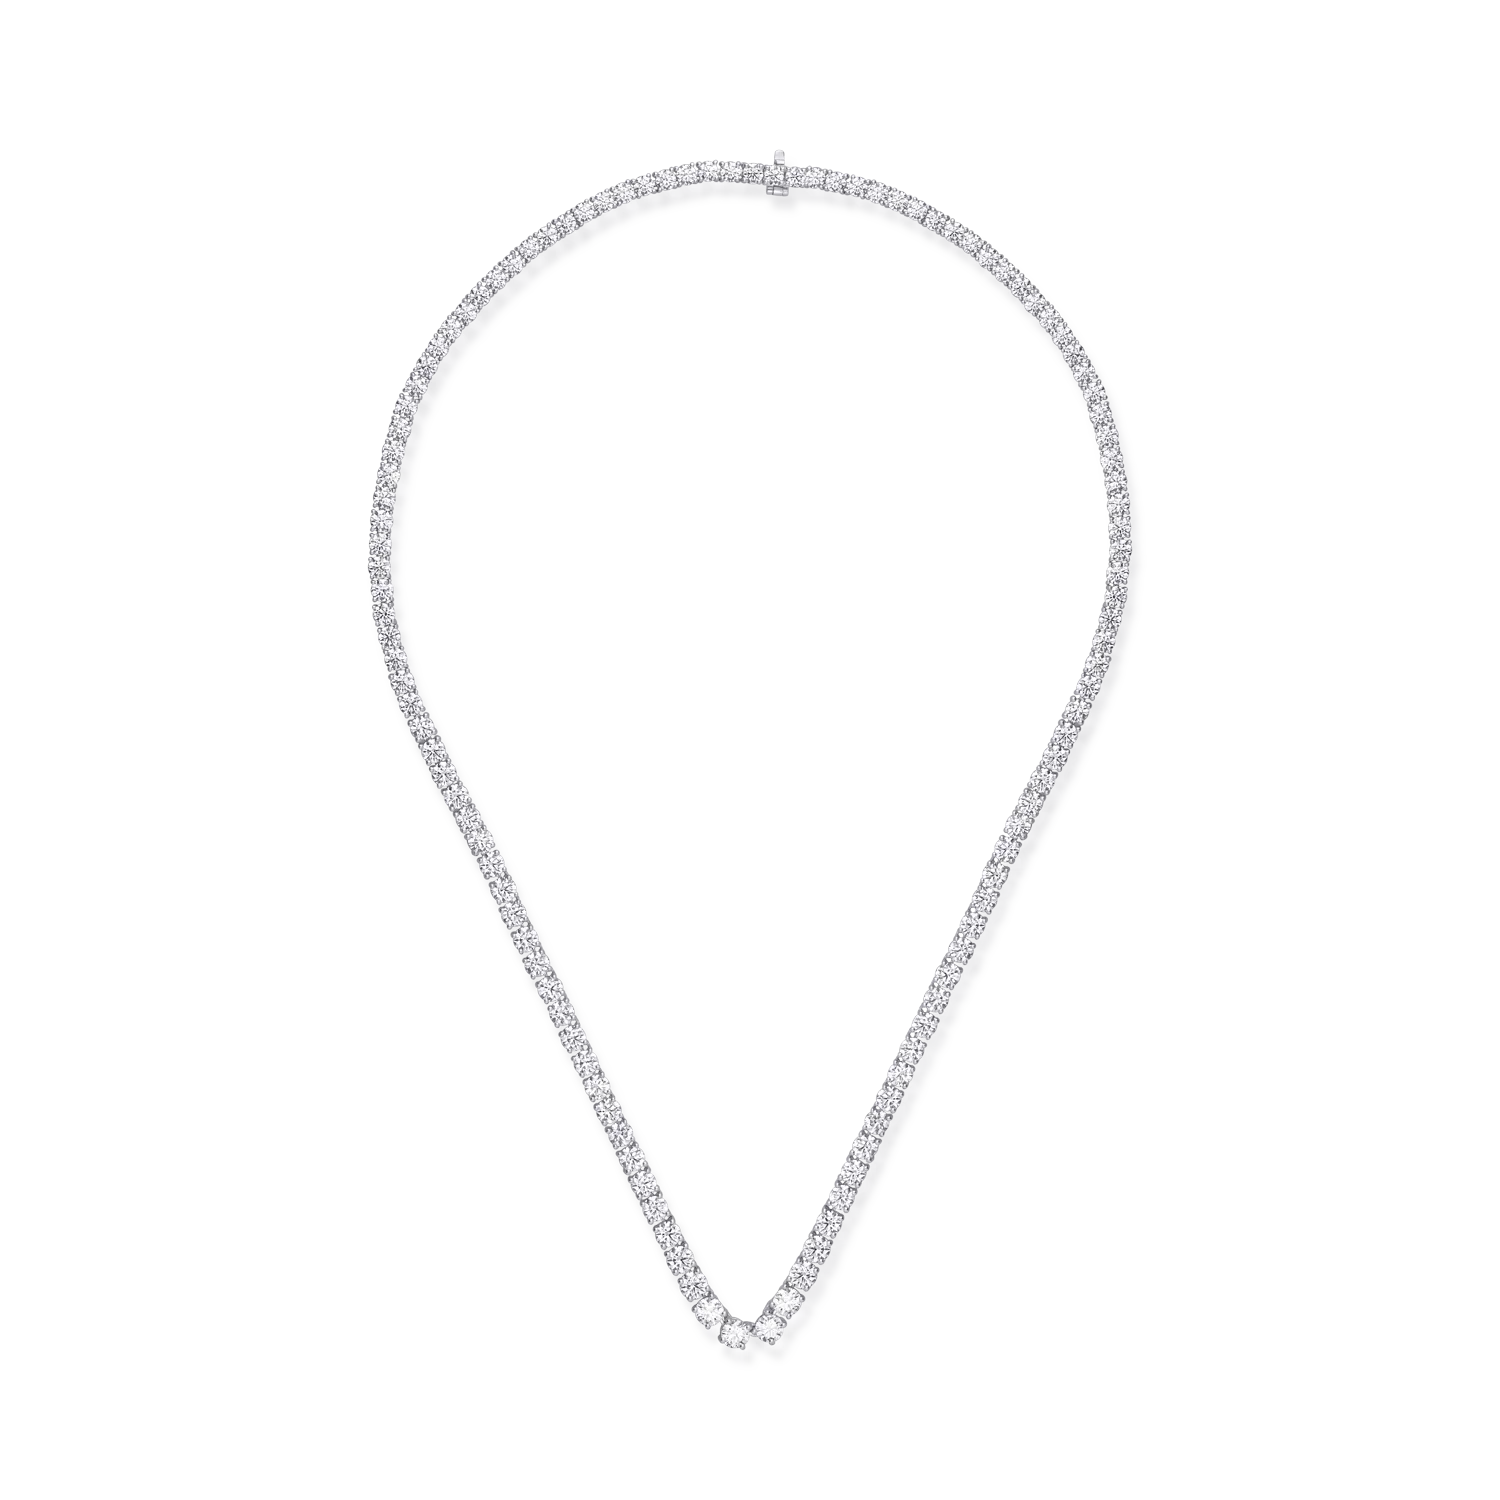 18K white gold tennis necklace with 16.46ct diamonds